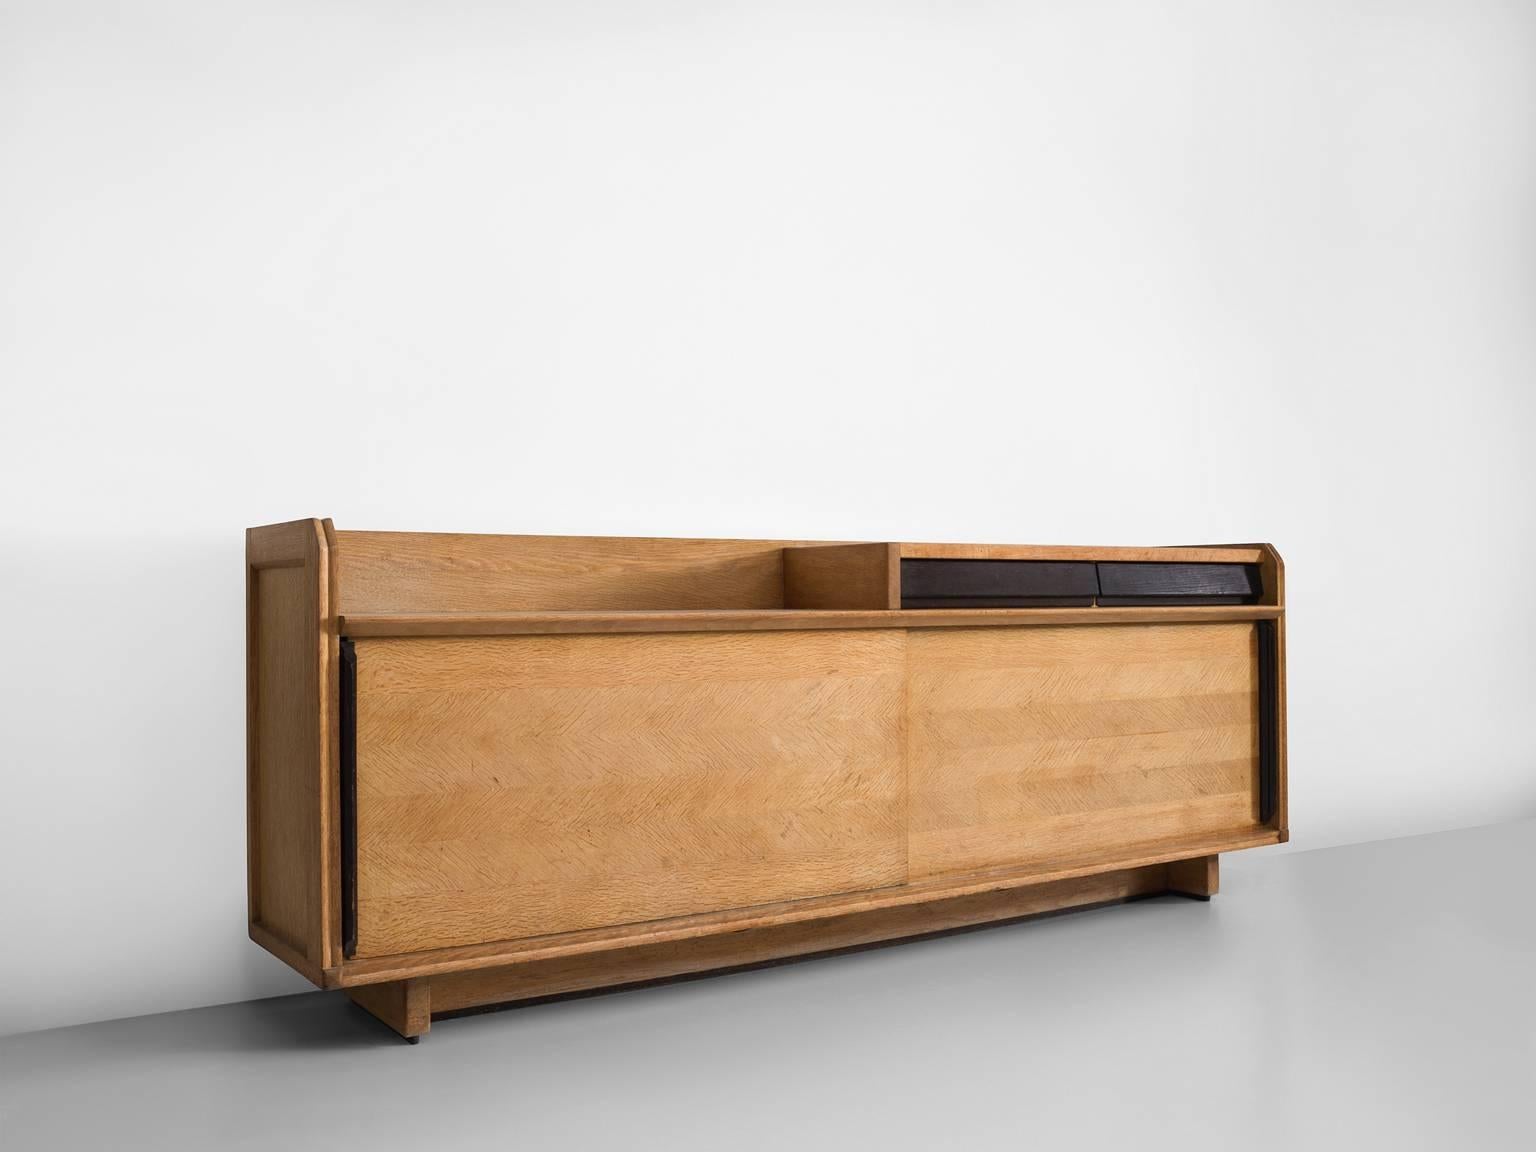 Credenza, in oak, metal and ceramic, by Robert Guillerme et Jacques Chambron for Votre Maison, France, 1960s.

This cabinet is designed by the French designer duo Guillerme and Chambron. The sideboard is characterised by the oakwood inlay patterns